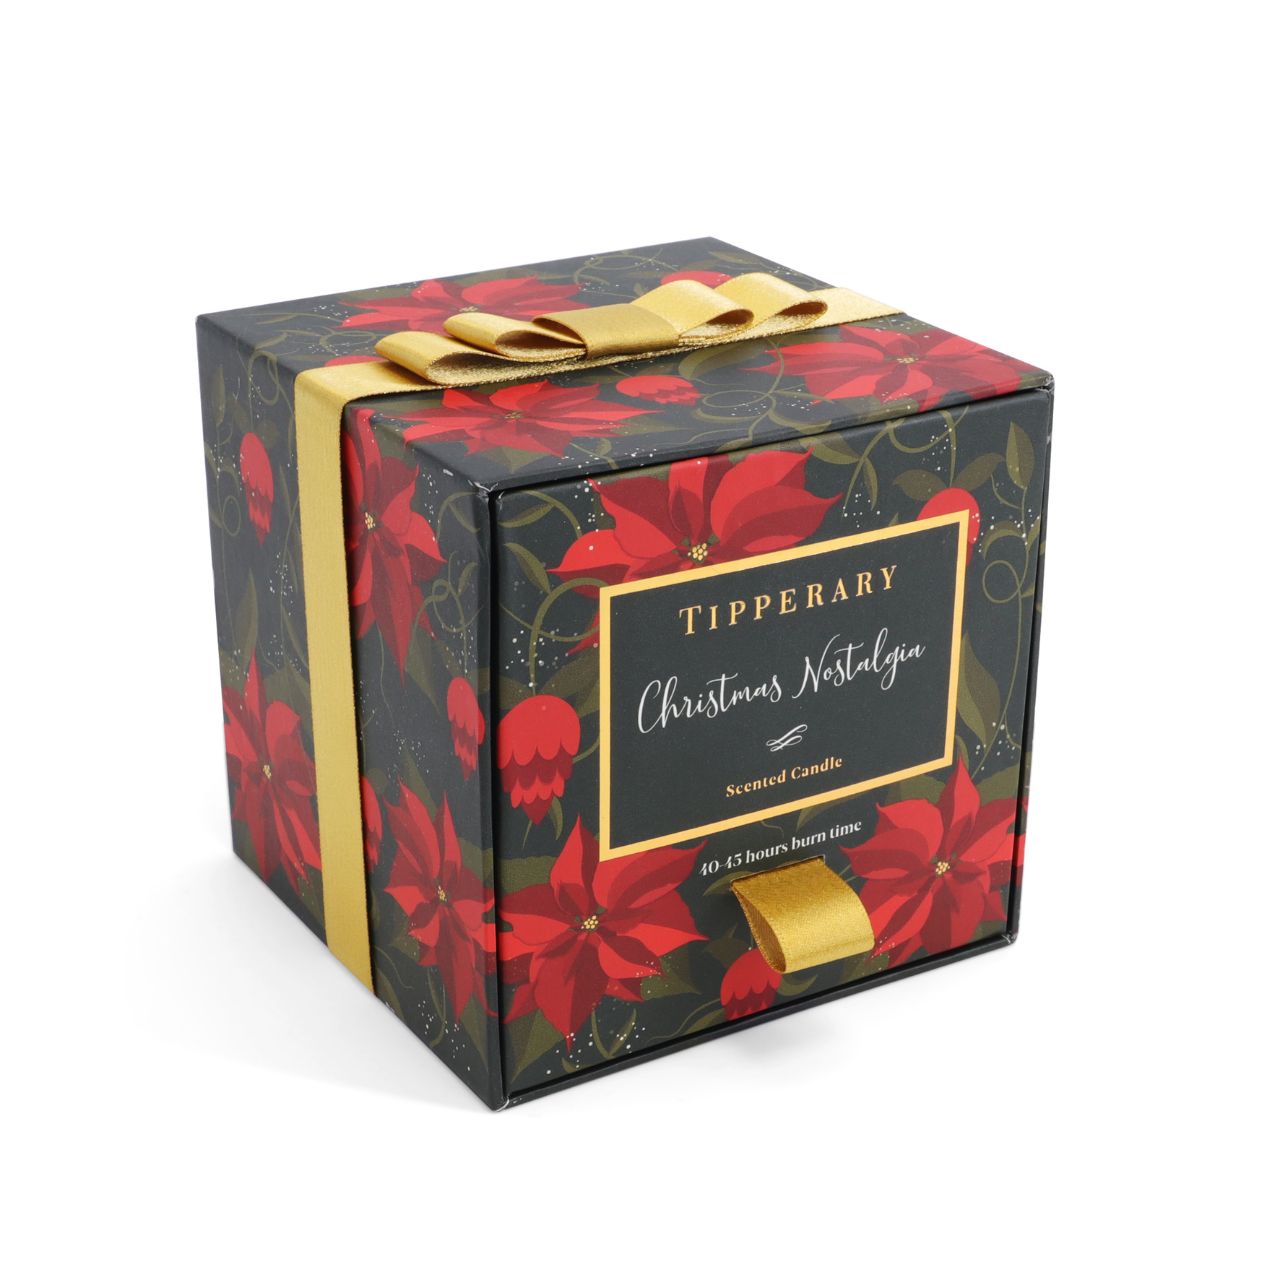 Christmas Nostalgia Poinsettia Tumbler Candle by Tipperary  A Christmas tree scent blended with spices fills the room with nostalgia and happy memories of Christmas.  Inspired by the warm, spicy aromas of the festive season Tipperary has produced the most beautiful collection of Christmas-inspired scented candles and fragrance diffuser sets all of which are presented in exquisitely designed festive gift boxes.